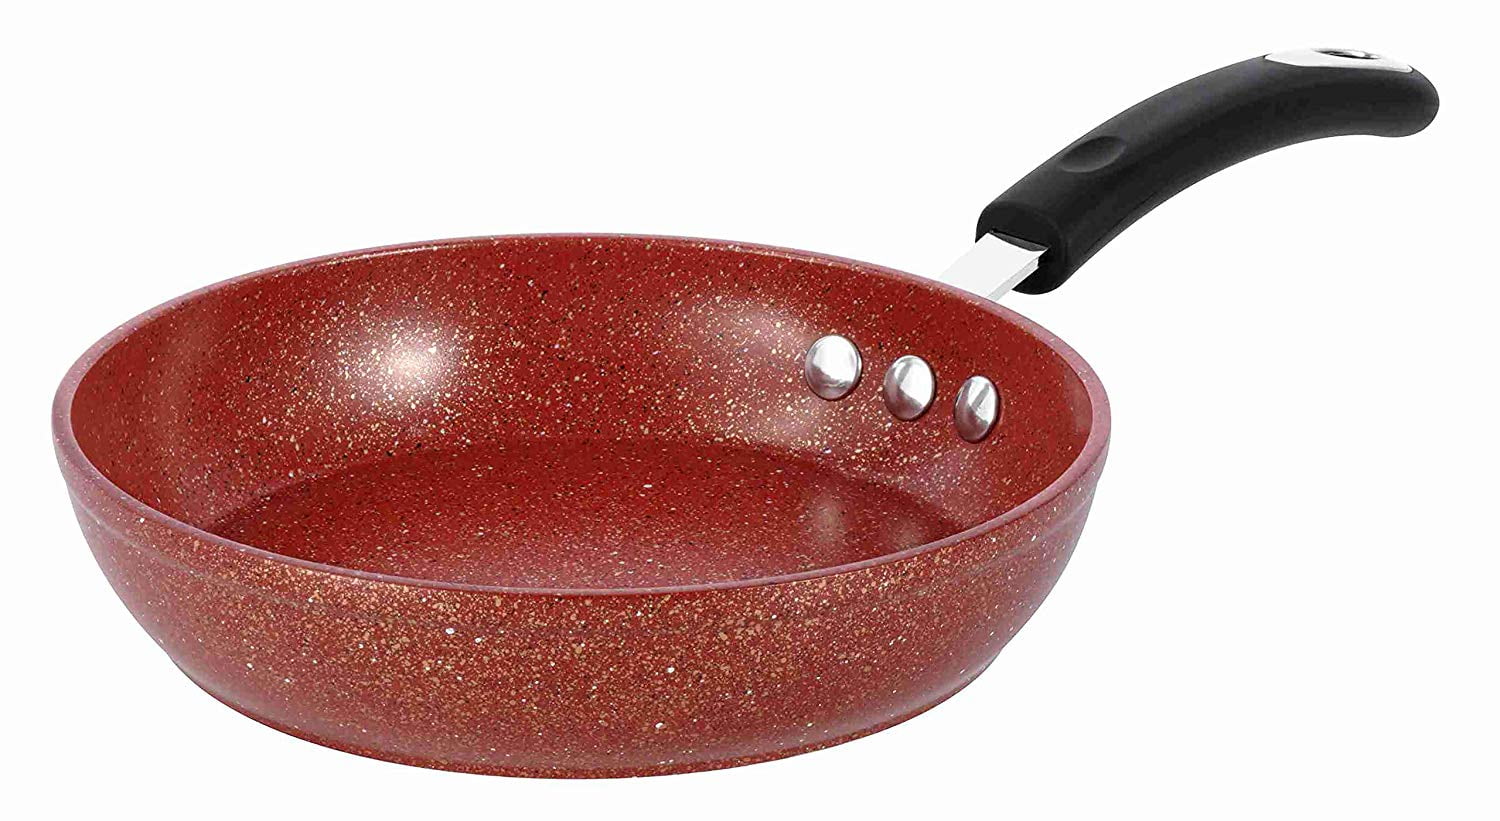  8 Stone Frying Pan by Ozeri, with 100% APEO & PFOA-Free  Stone-Derived Non-Stick Coating from Germany